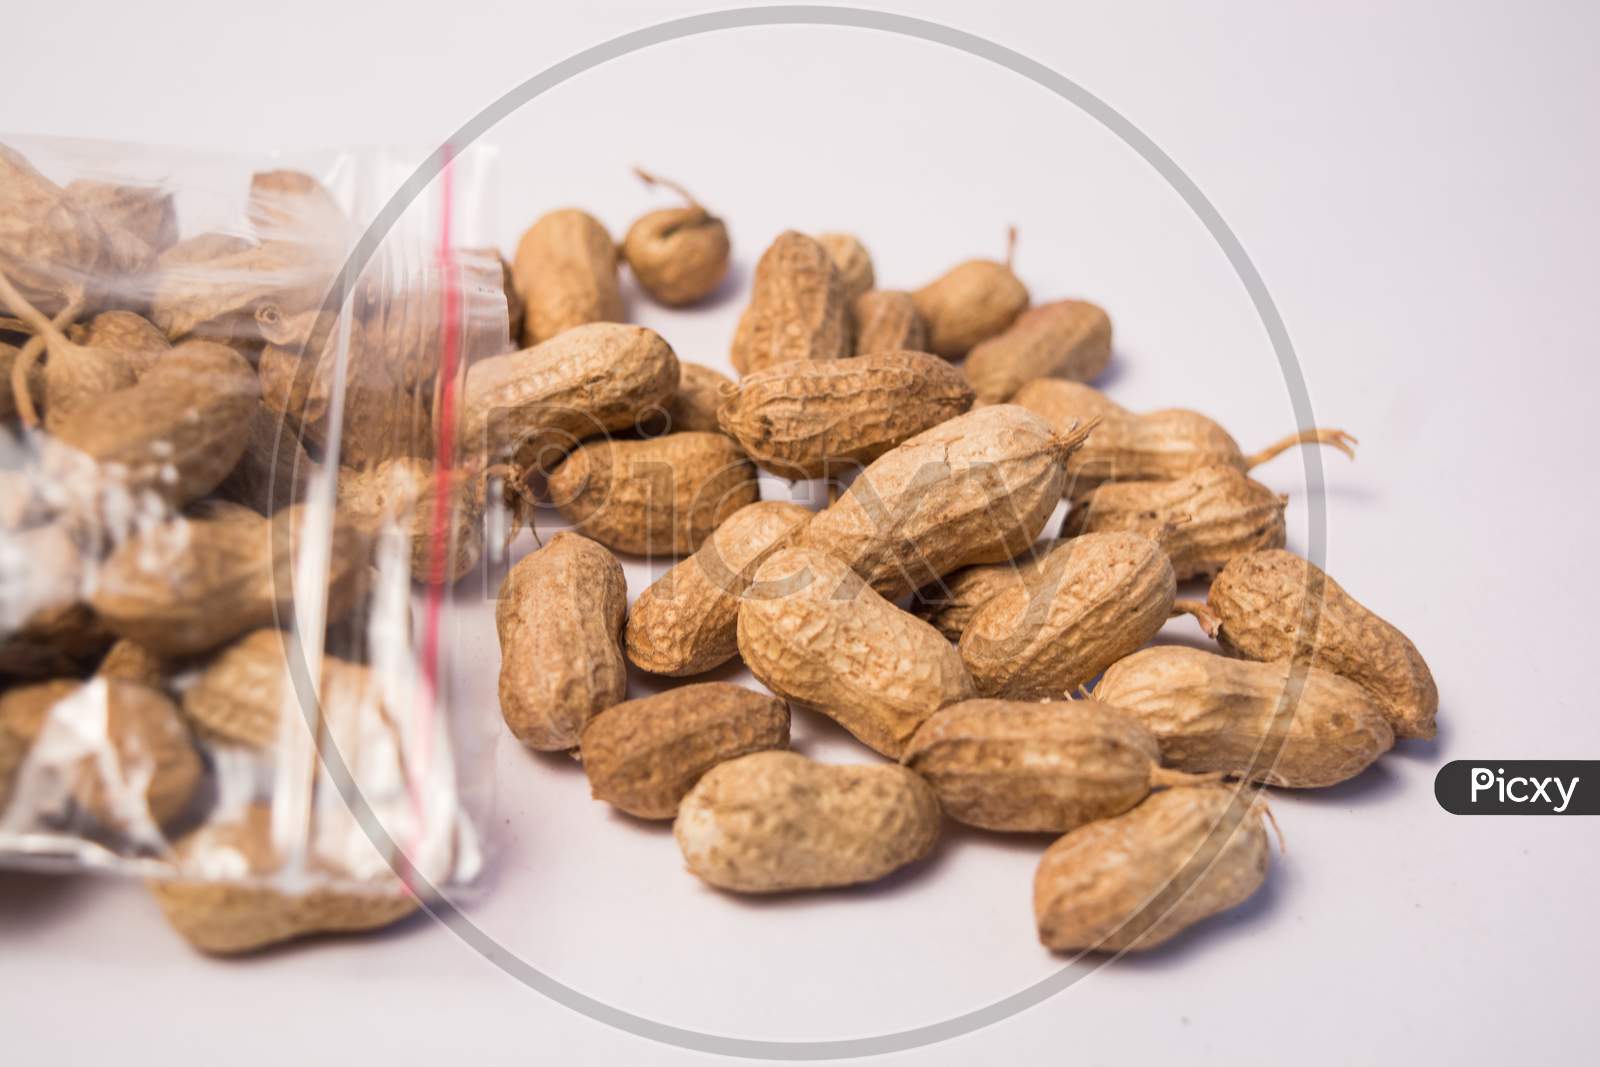 Groundnuts Or Peanuts Coming Out Of The Plastic Bag On Isolated Background